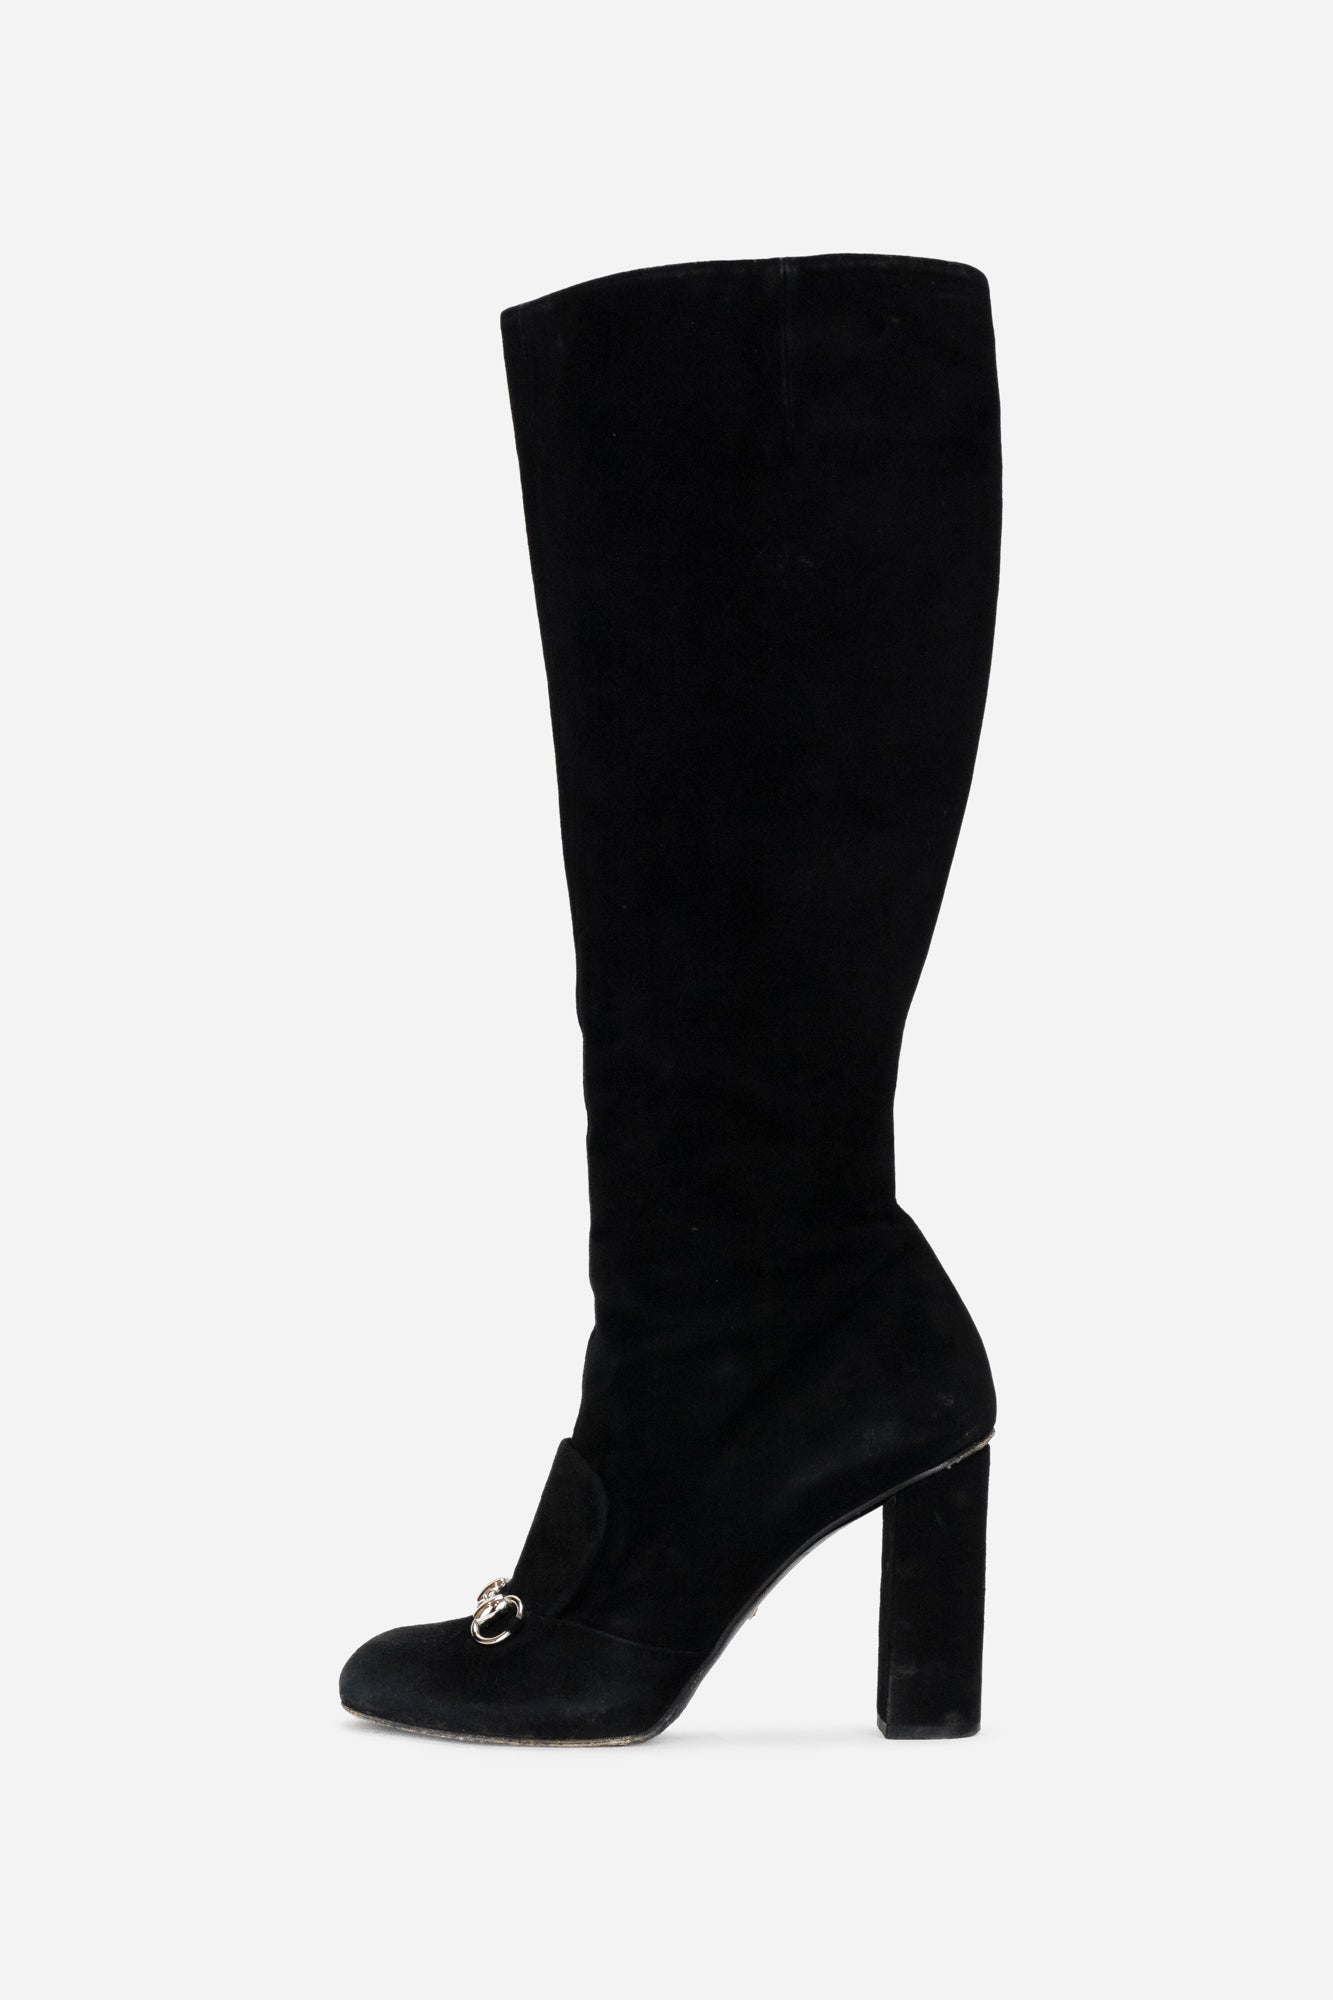 Black Suede Knee High with Horse-Bit & Tongue